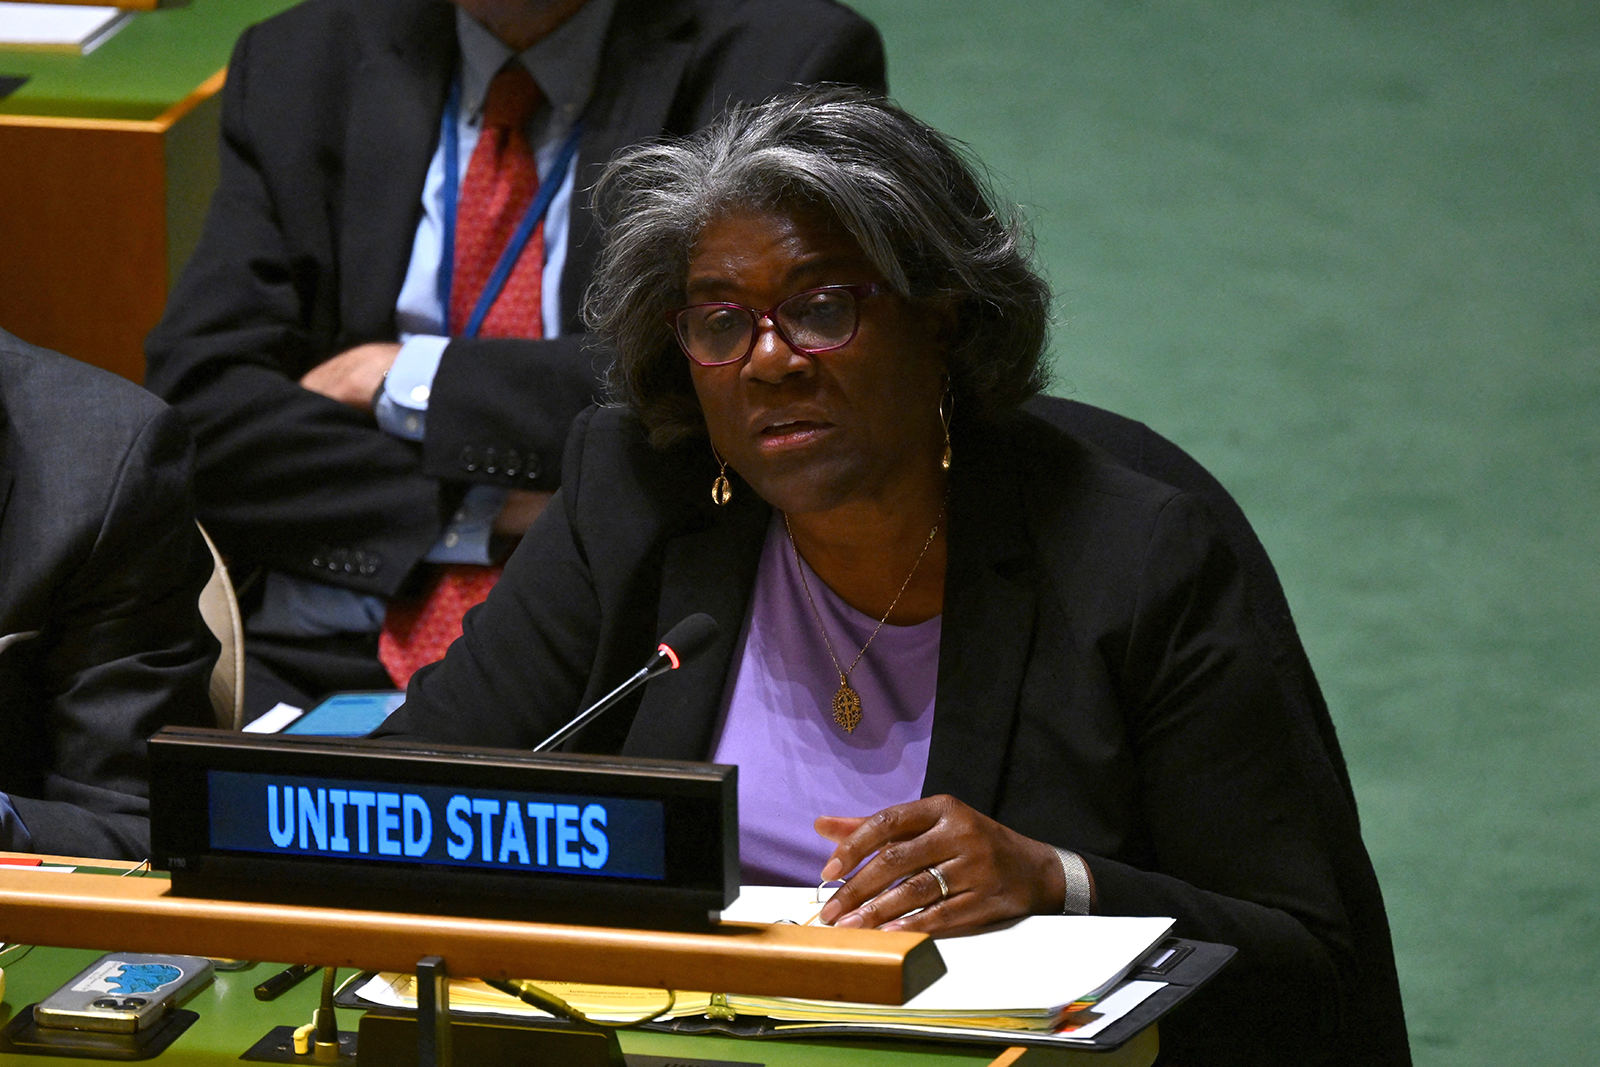 Linda Thomas-Greenfield speaks during a General Assembly meeting at UN headquarters in New York on December 12.